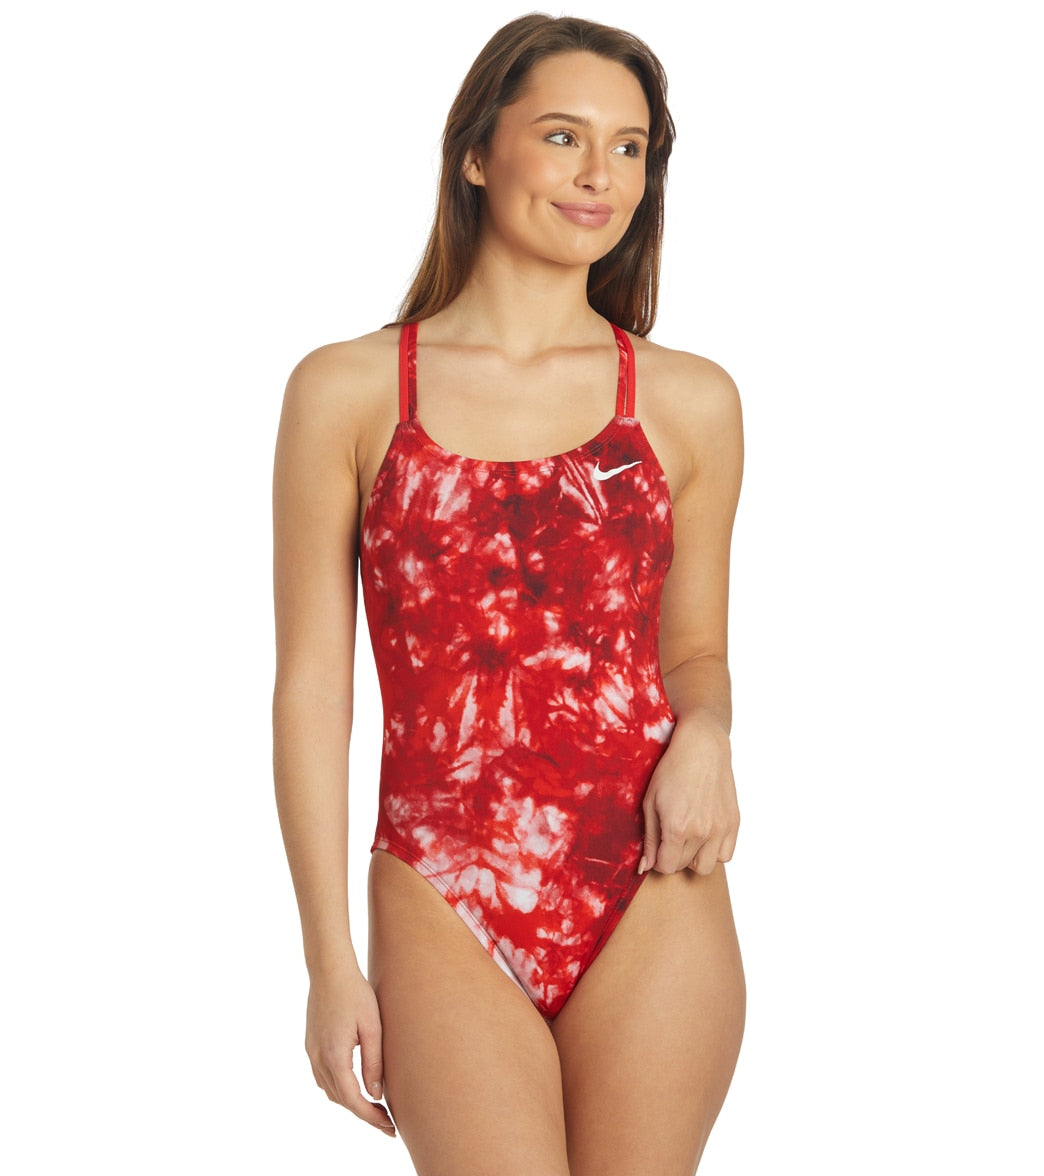 Nike Women's Hydrastrong Spiderback One Piece Swimsuit at SwimOutlet.com